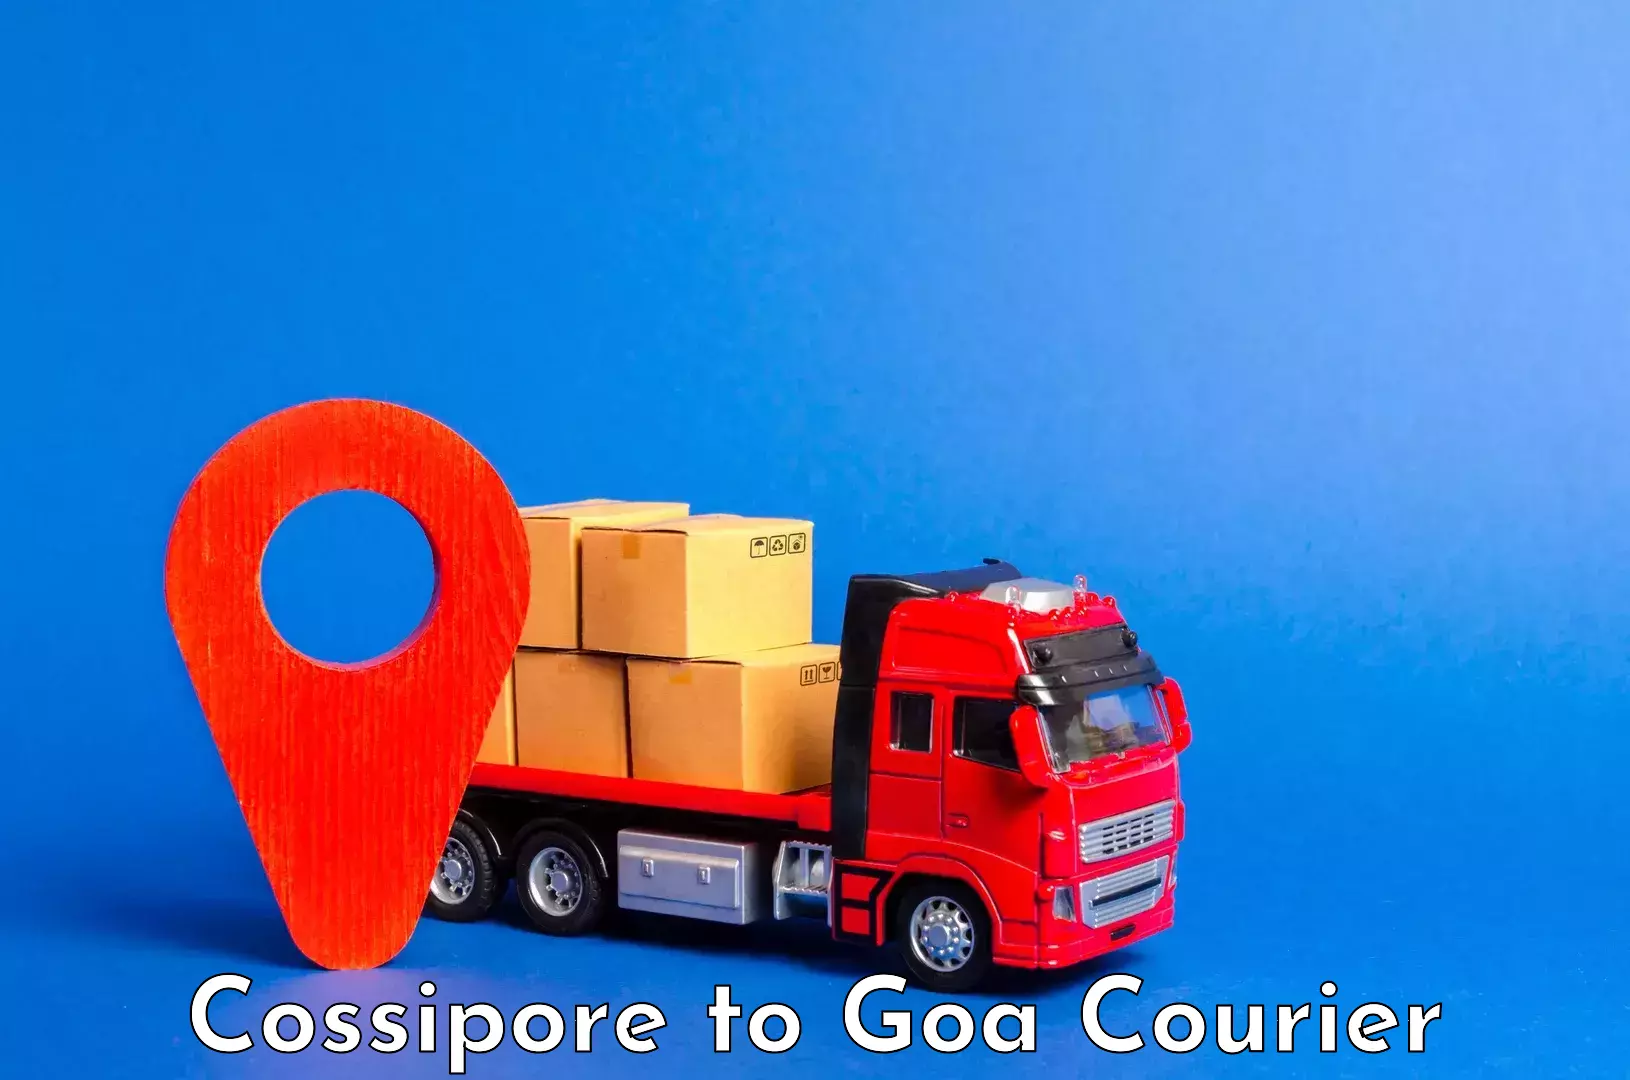 Luggage shipment specialists Cossipore to South Goa